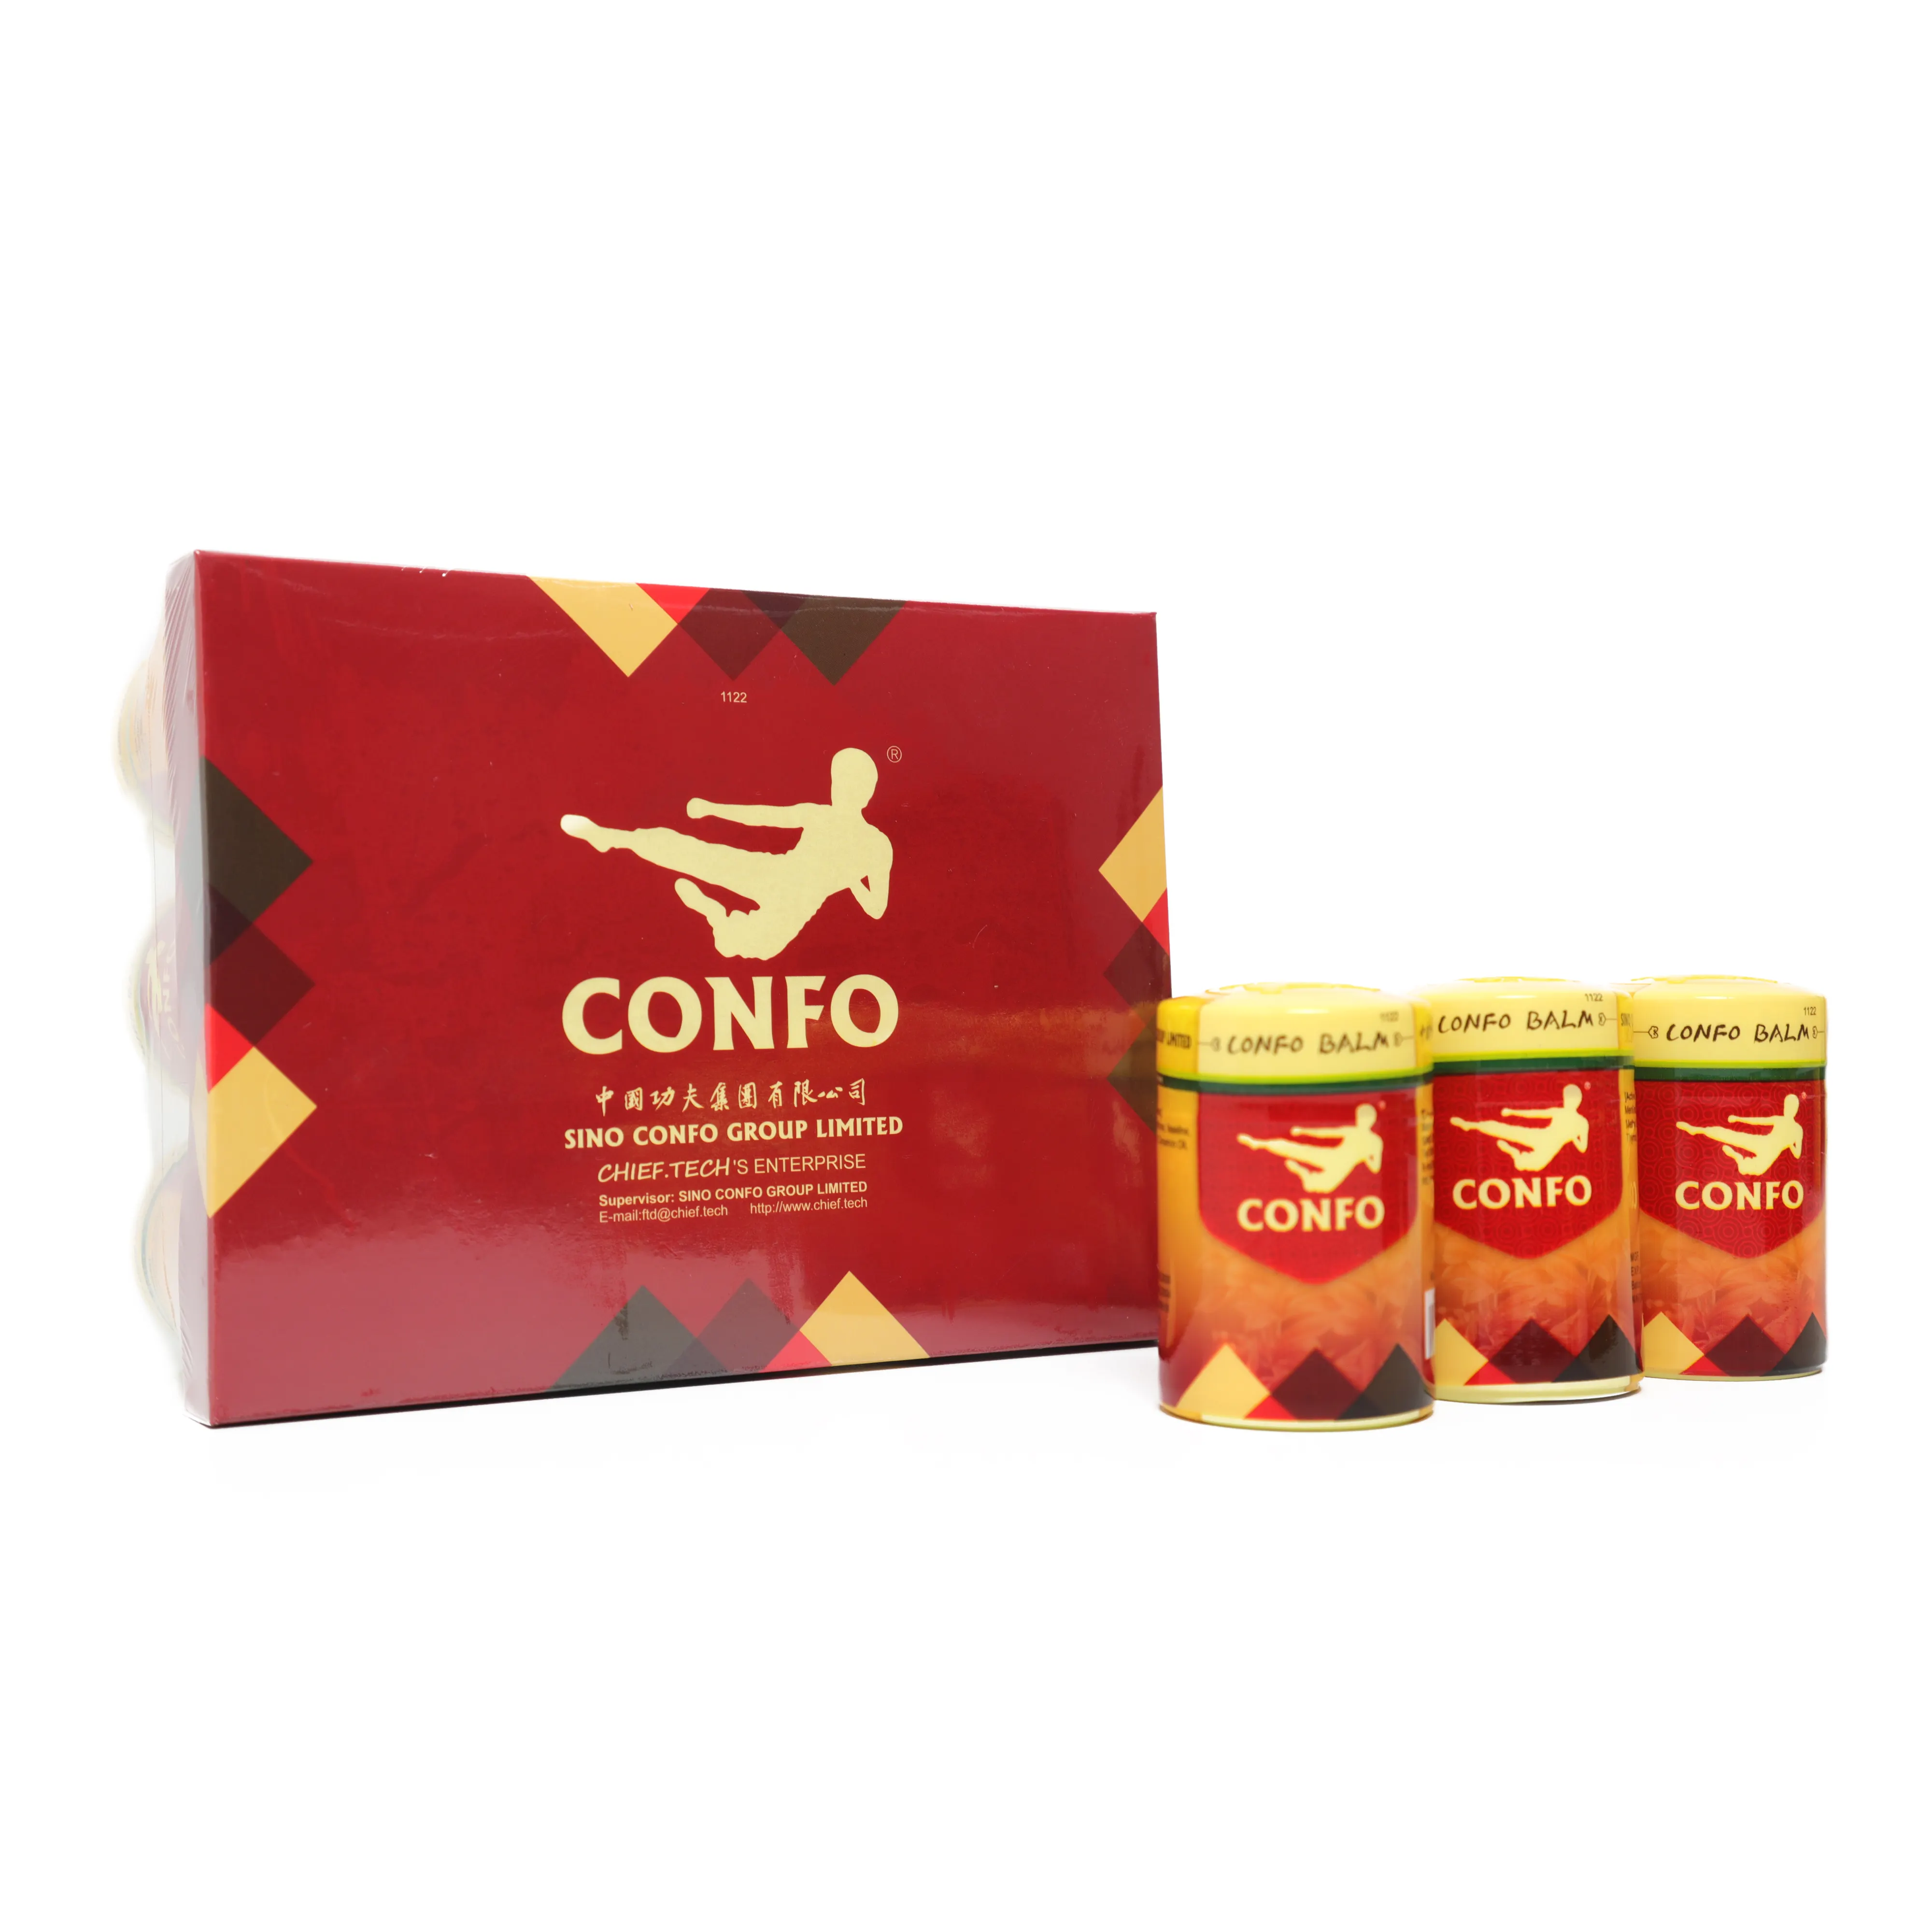 Confo Arthritis Muscle Ache Rheumatic Body Pain Relief Lower Back Medical Ointment